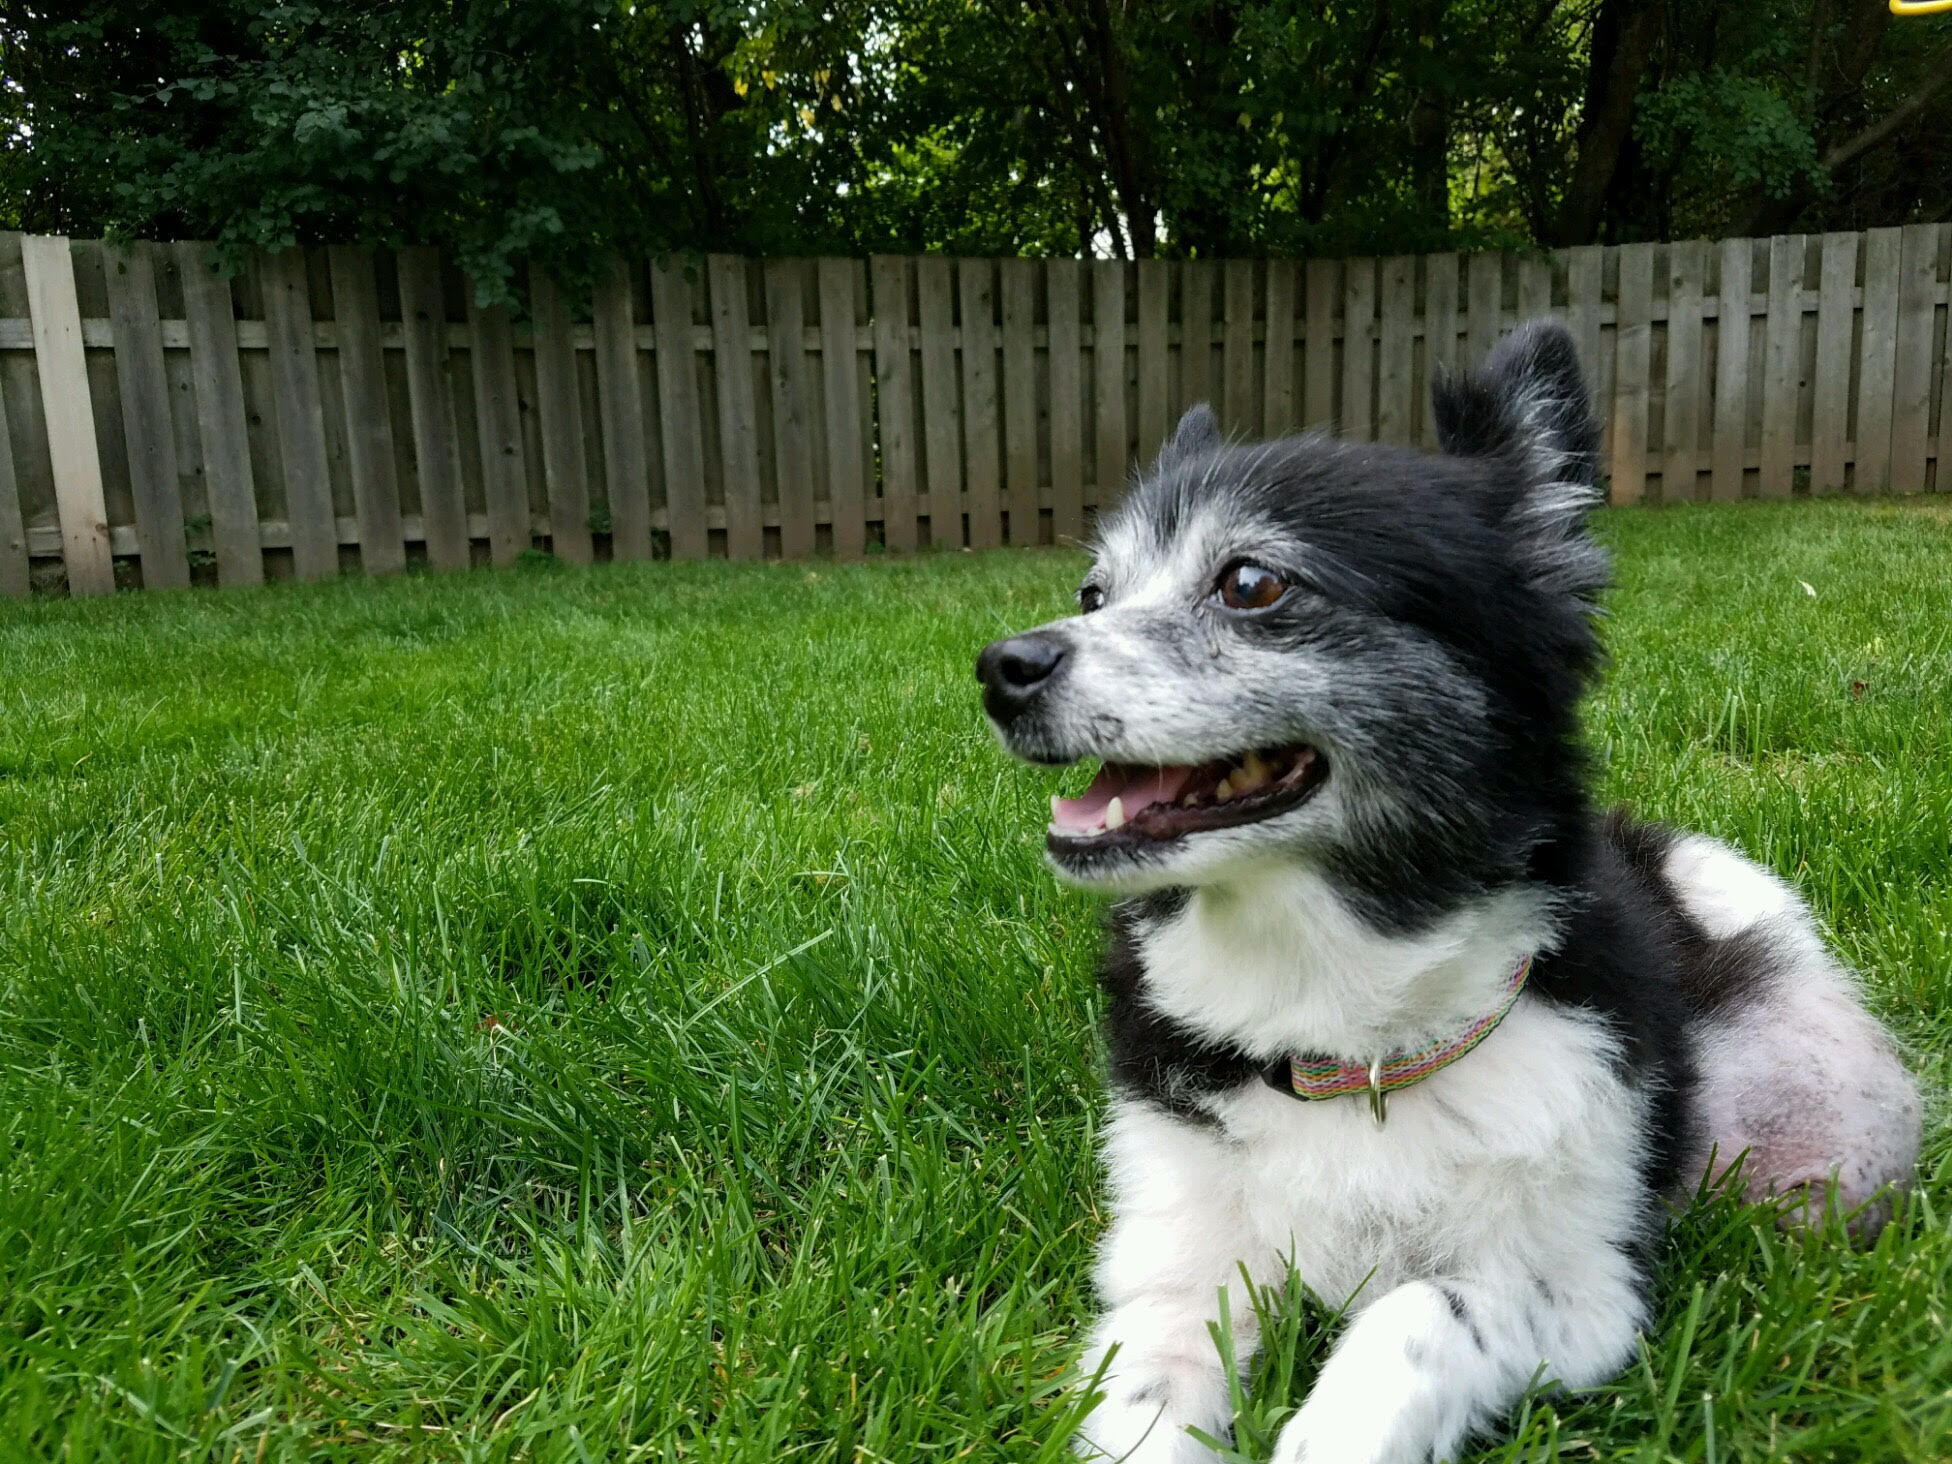 Small black and white dog laying the grass of a fenced area.